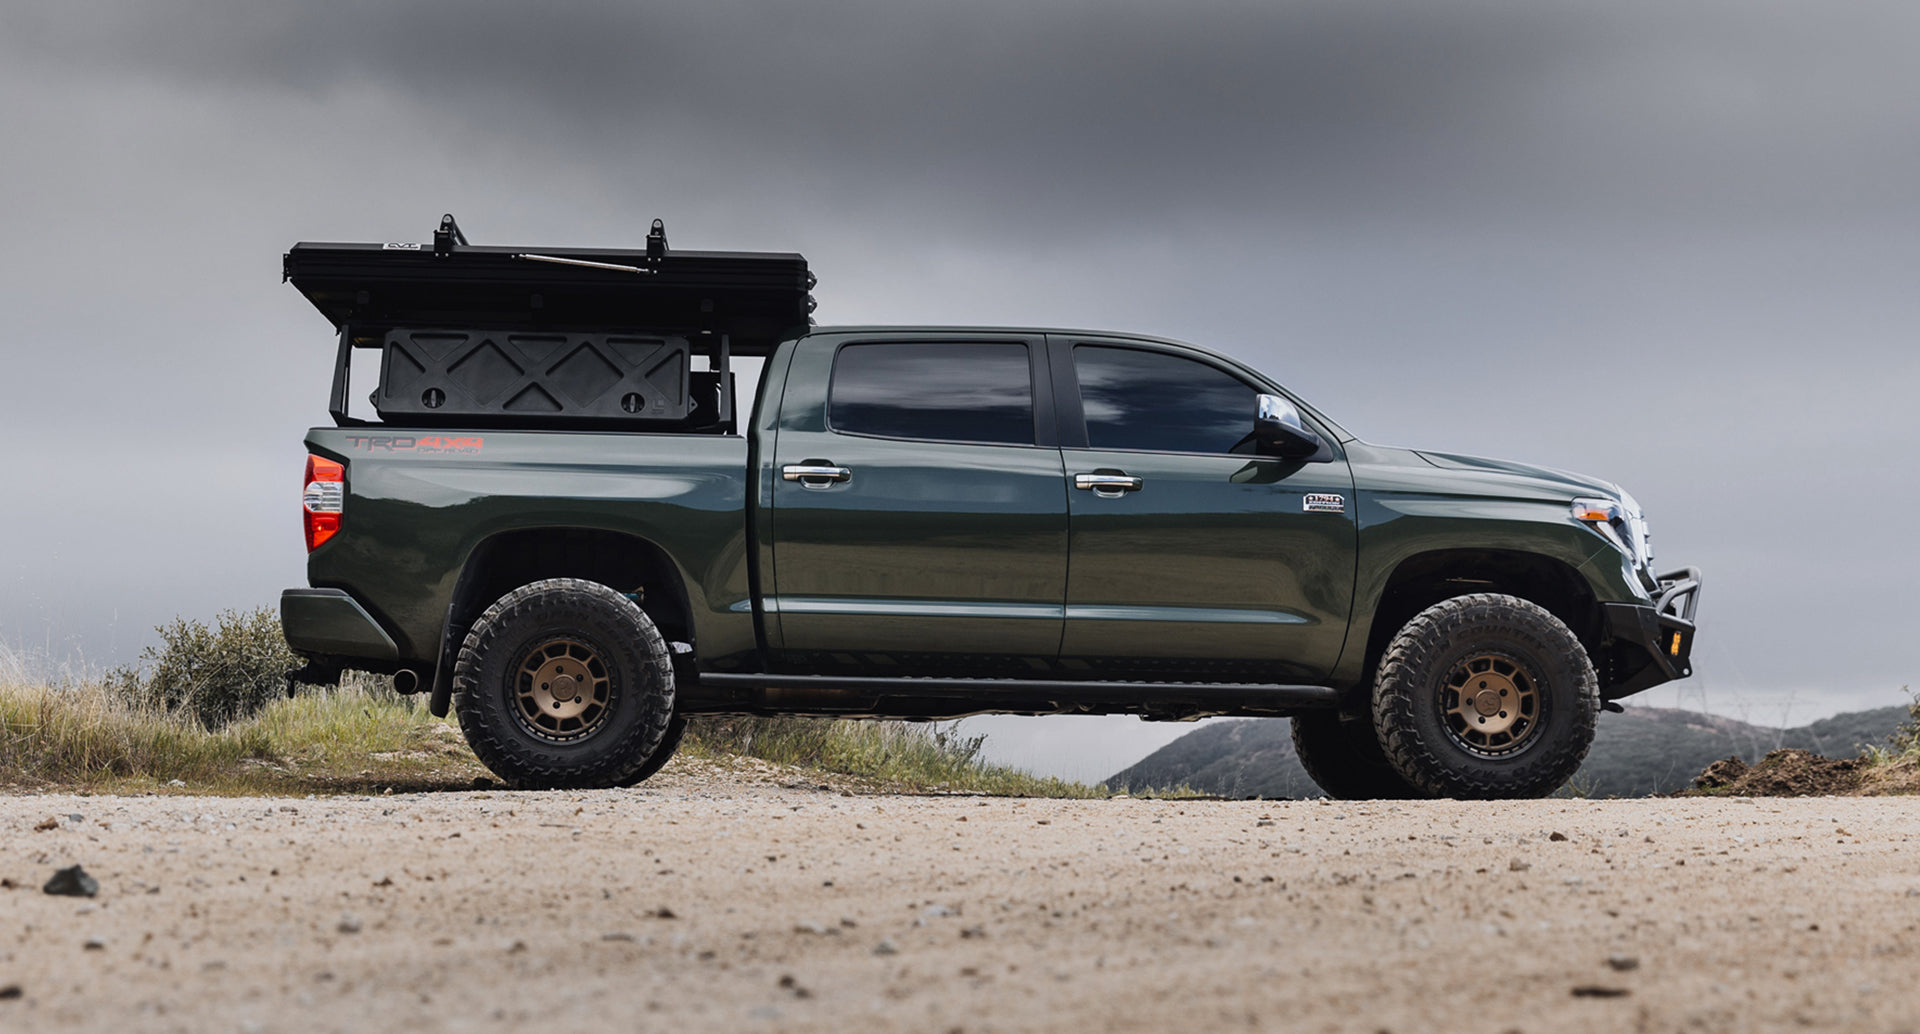 Toyota Tundra Overland Build in Army Green with Bronze Off-road Wheels